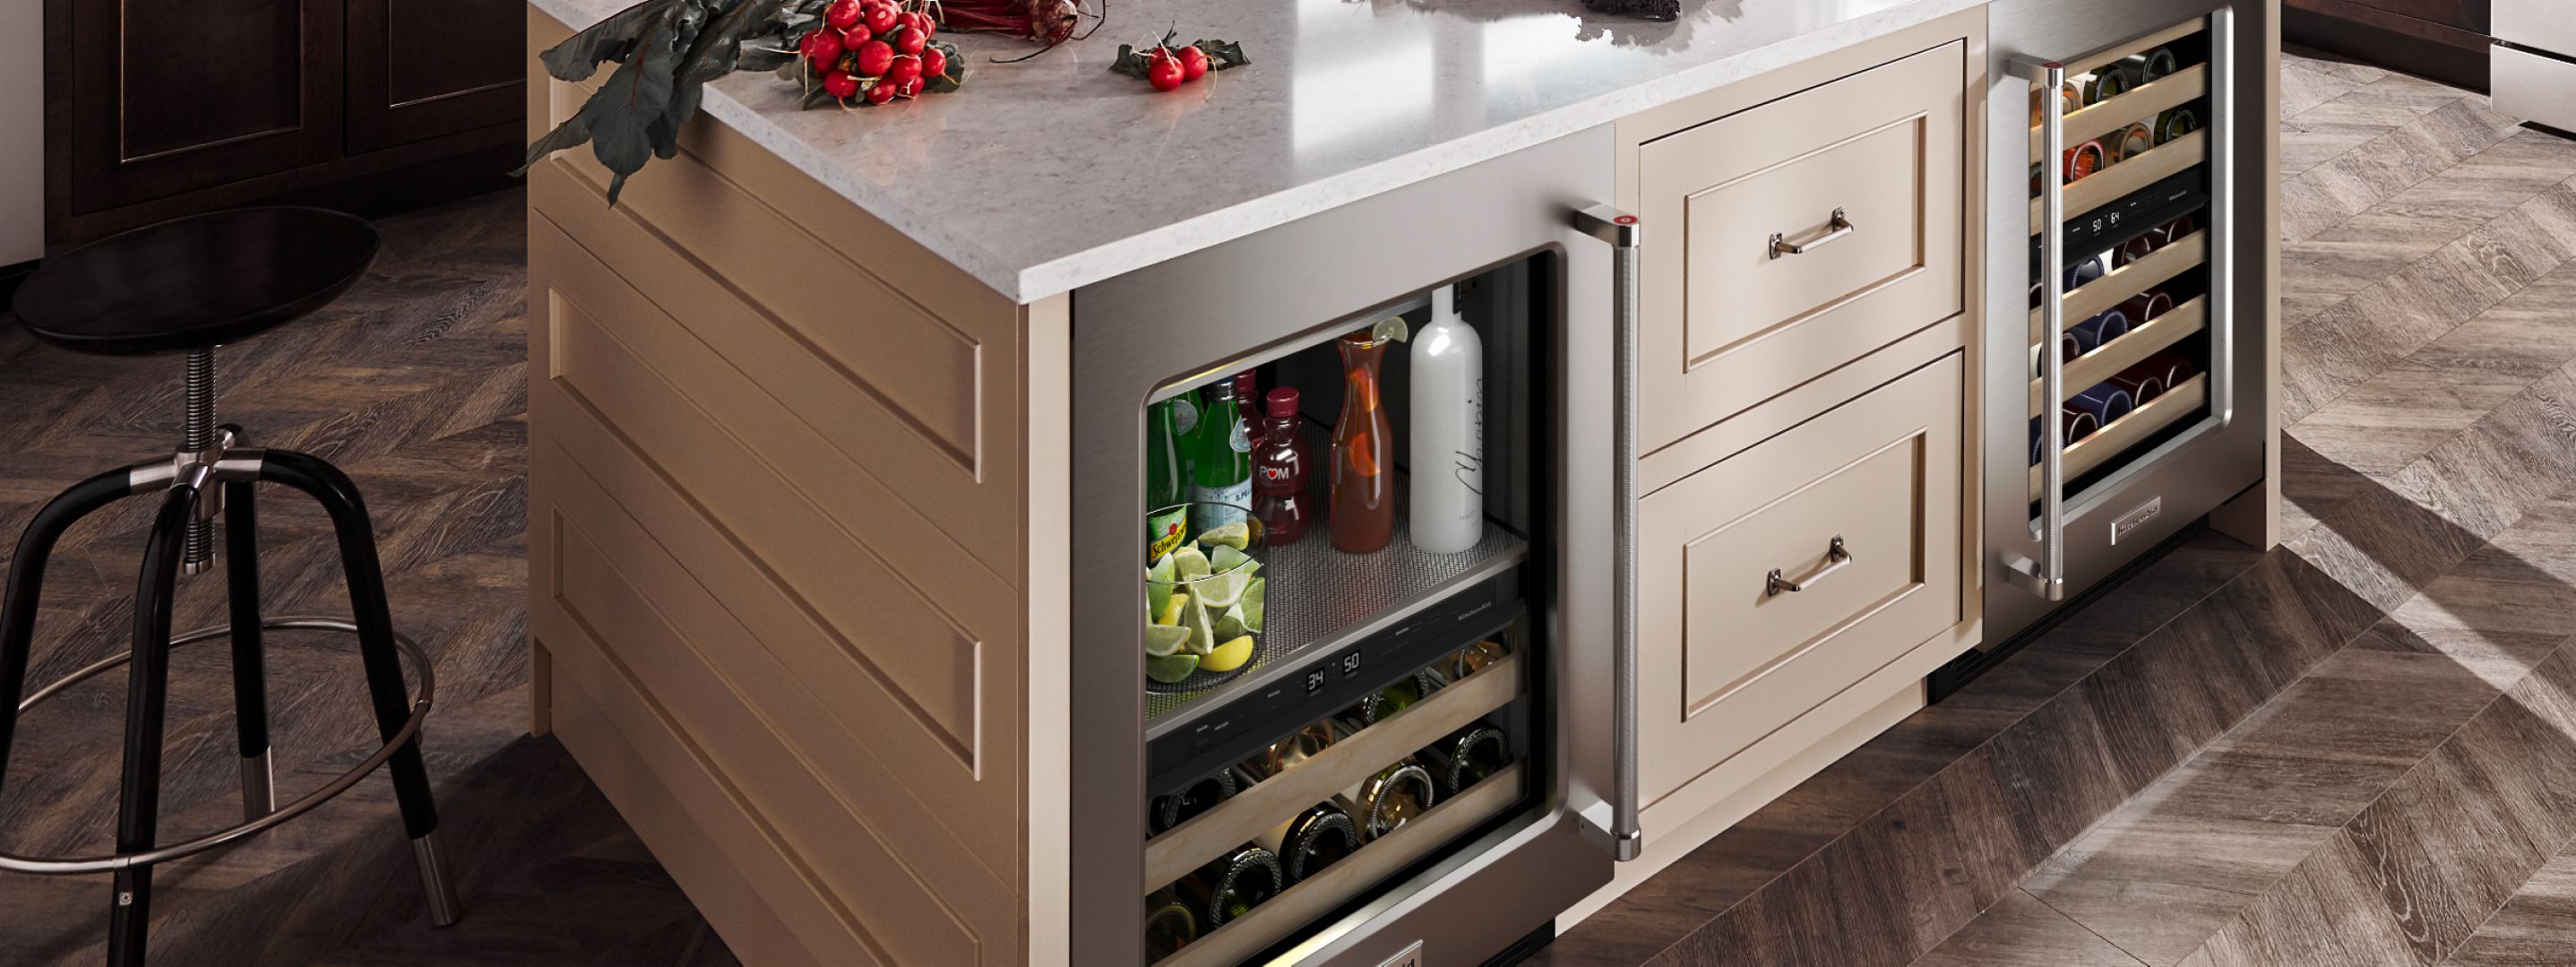 Shop limited-time offers on select undercounter refrigerators.